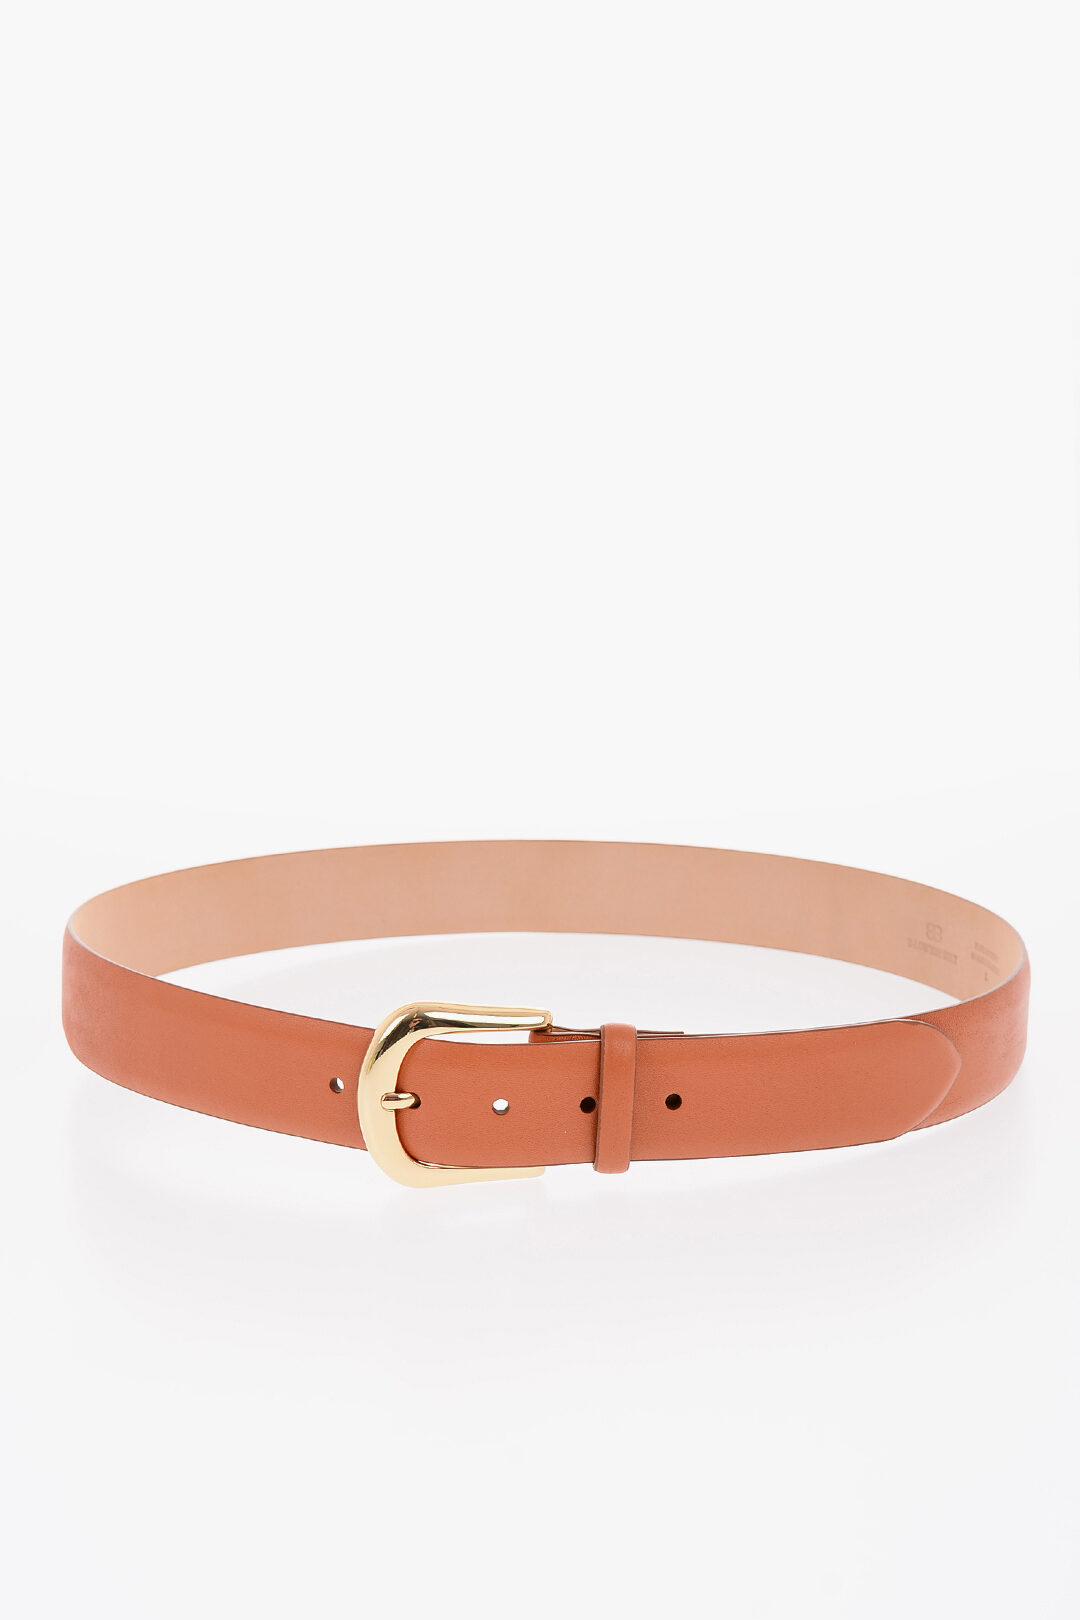 B-Low The Belt Leather KENNEDY Belt with Gold-toned Hardware women ...